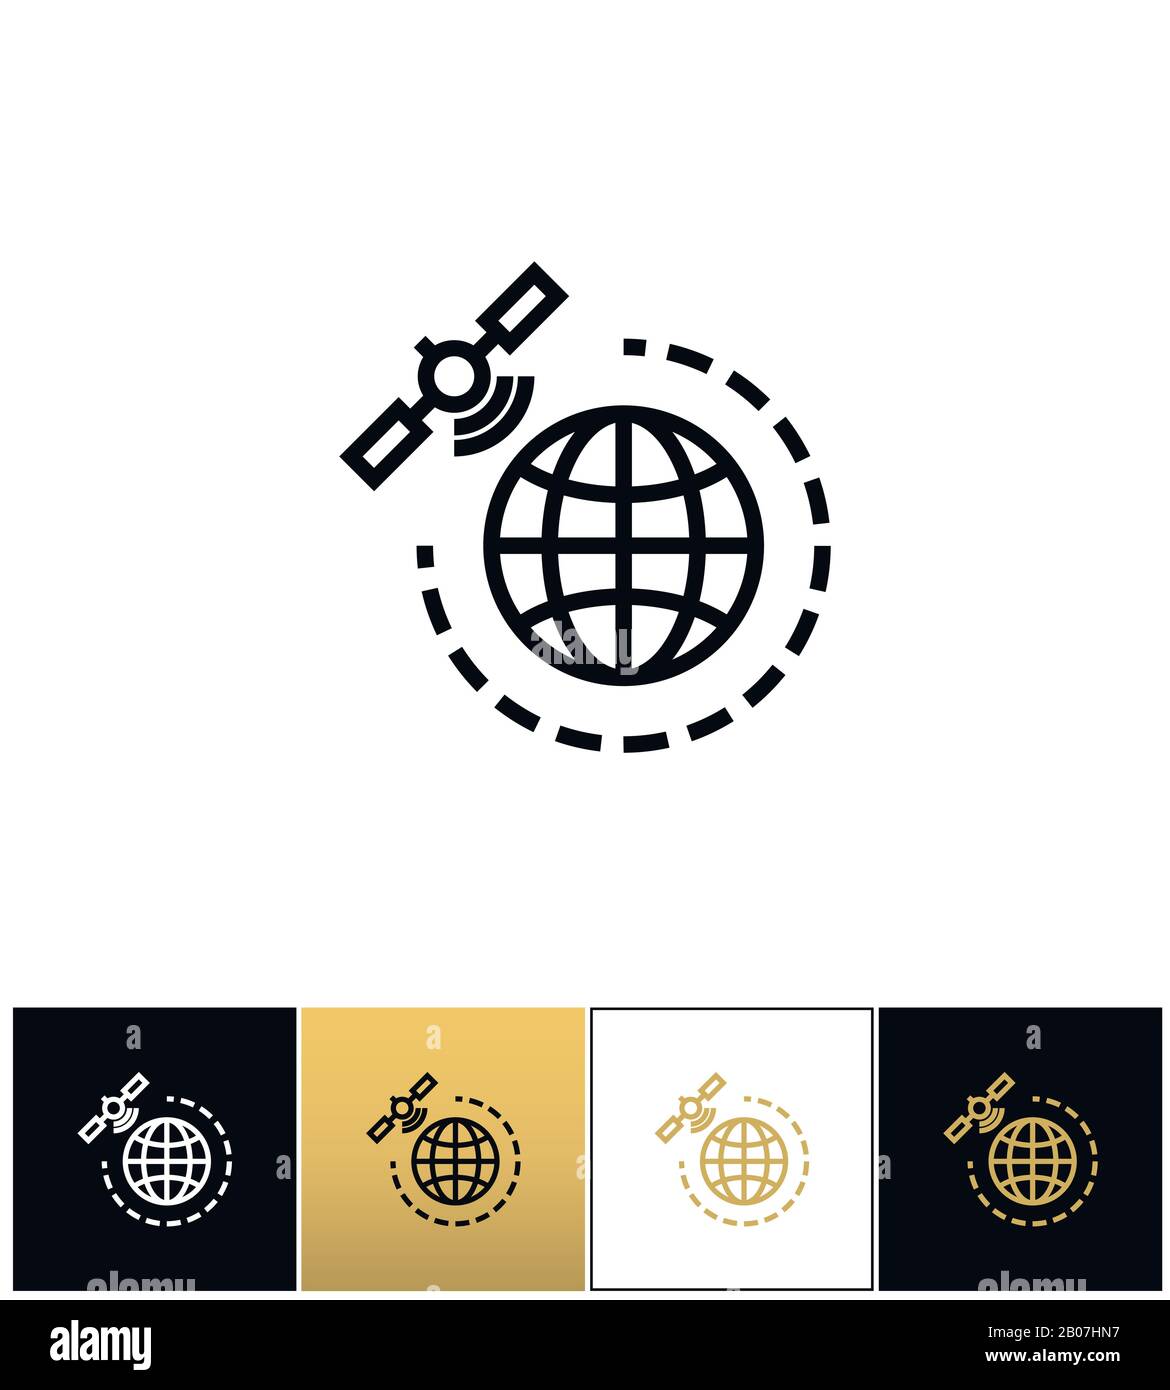 World gps satellite vector icon. World gps satellite pictograph on black, white and gold background Stock Vector